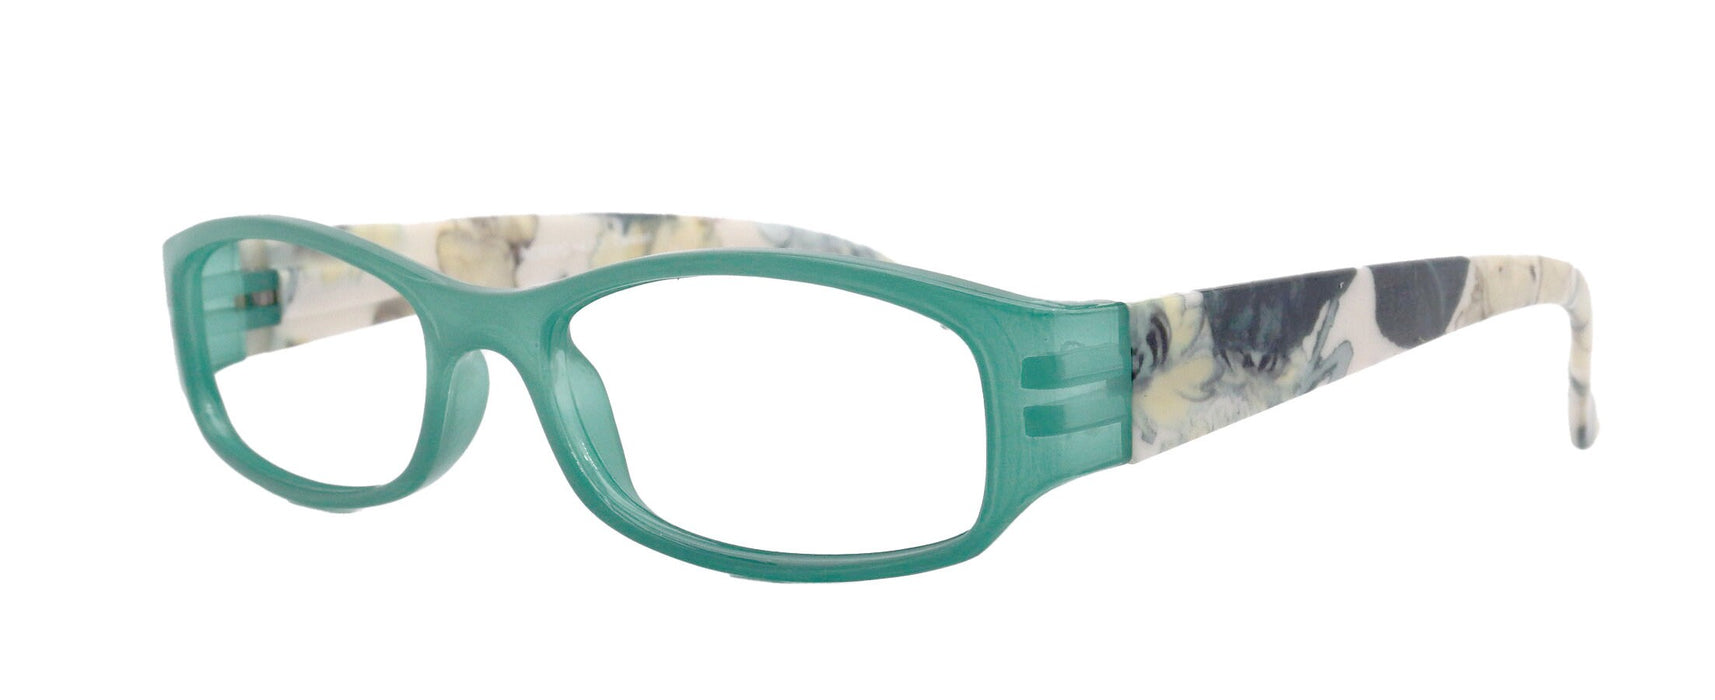 Rosie Premium Reading Glasses, Fashion Reader (Flower Turquoise / Green) Print, Oval Shape +4 High Magnification, NY Fifth Avenue